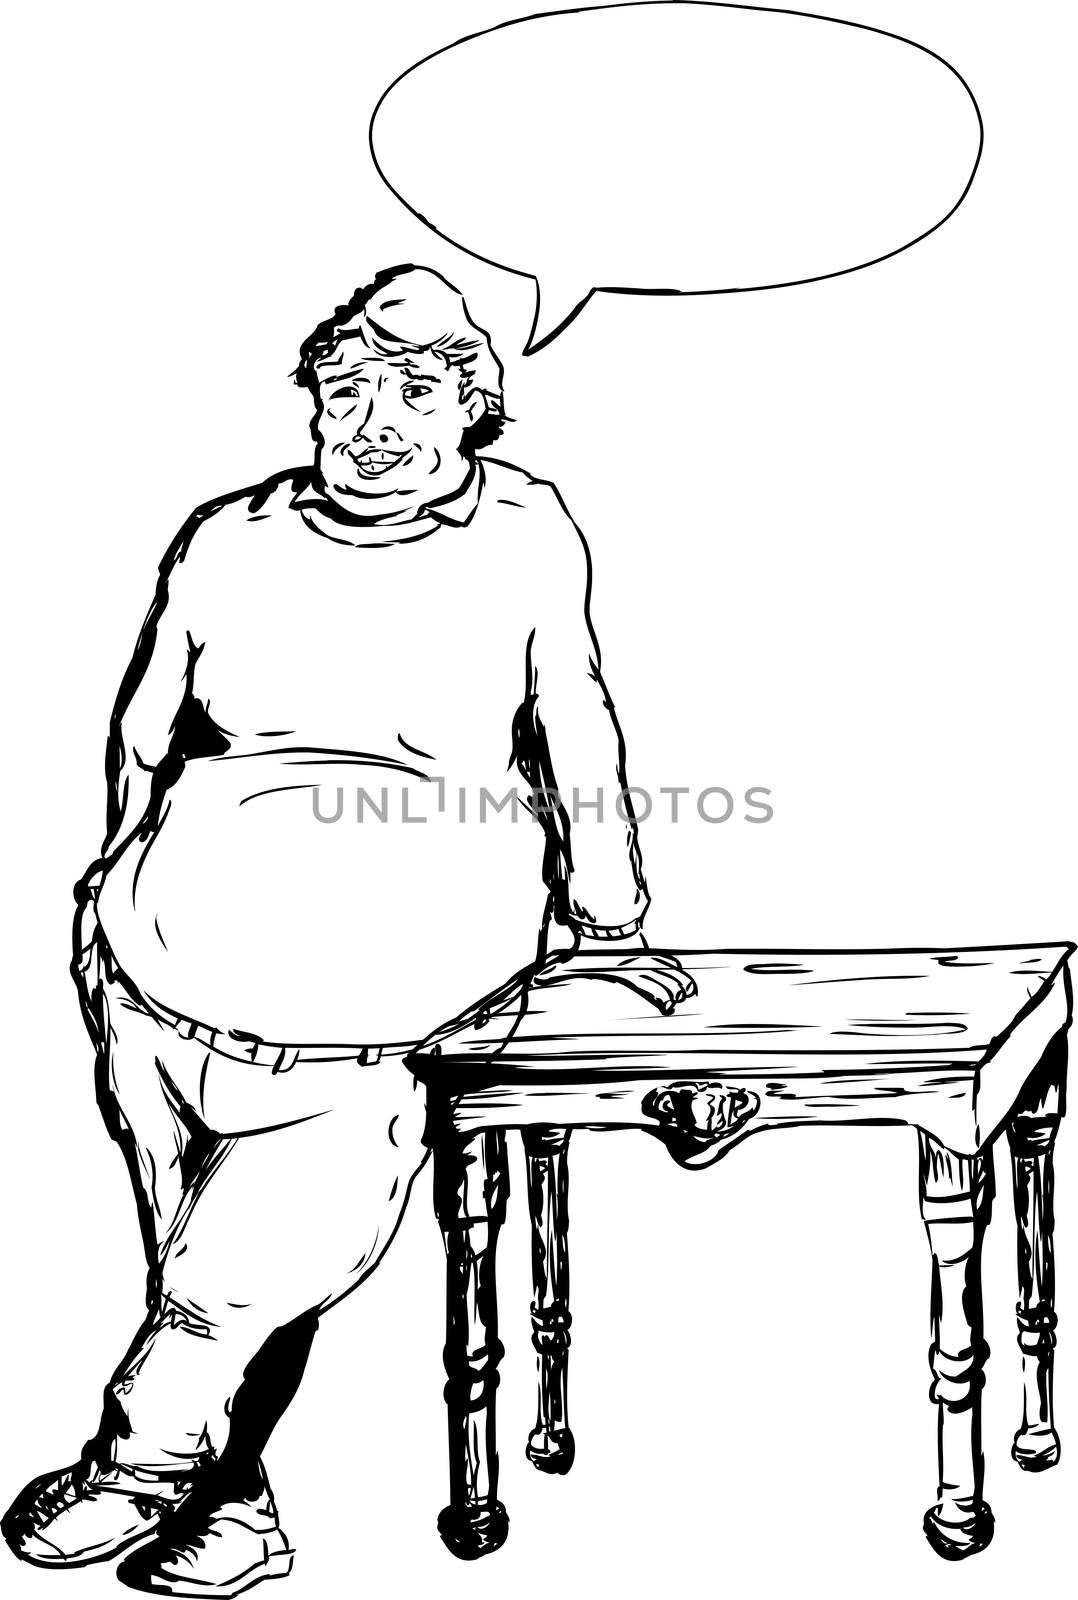 Overweight mature laughing European male leaning on table with hand next to word balloon